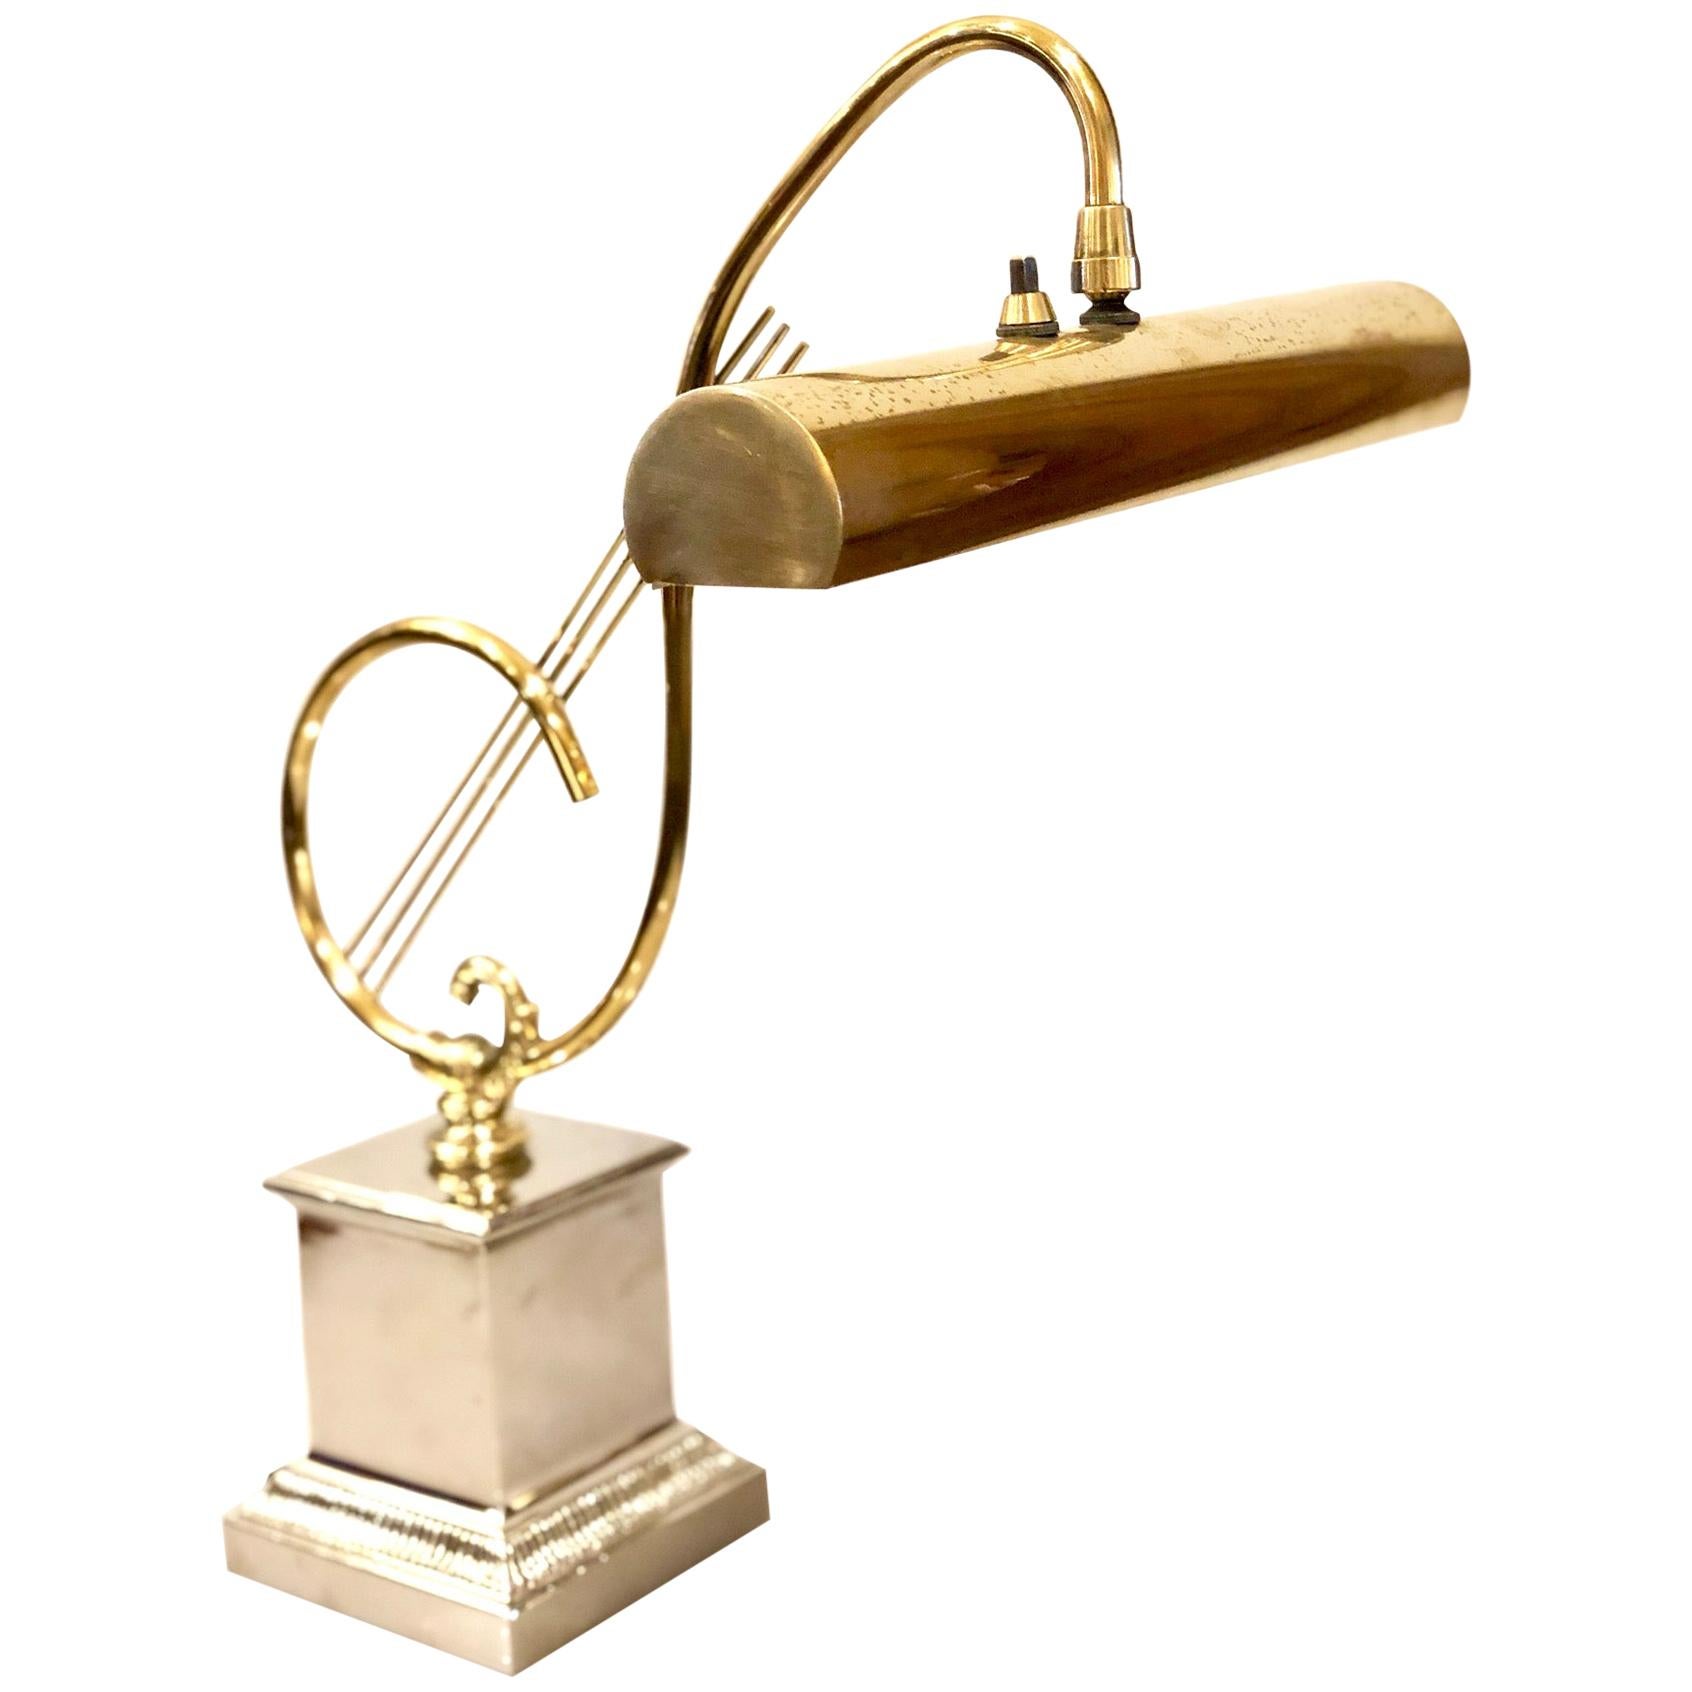 Treble Clef Piano Desk Lamp in Brass and Chrome Base by Laurel Lighting